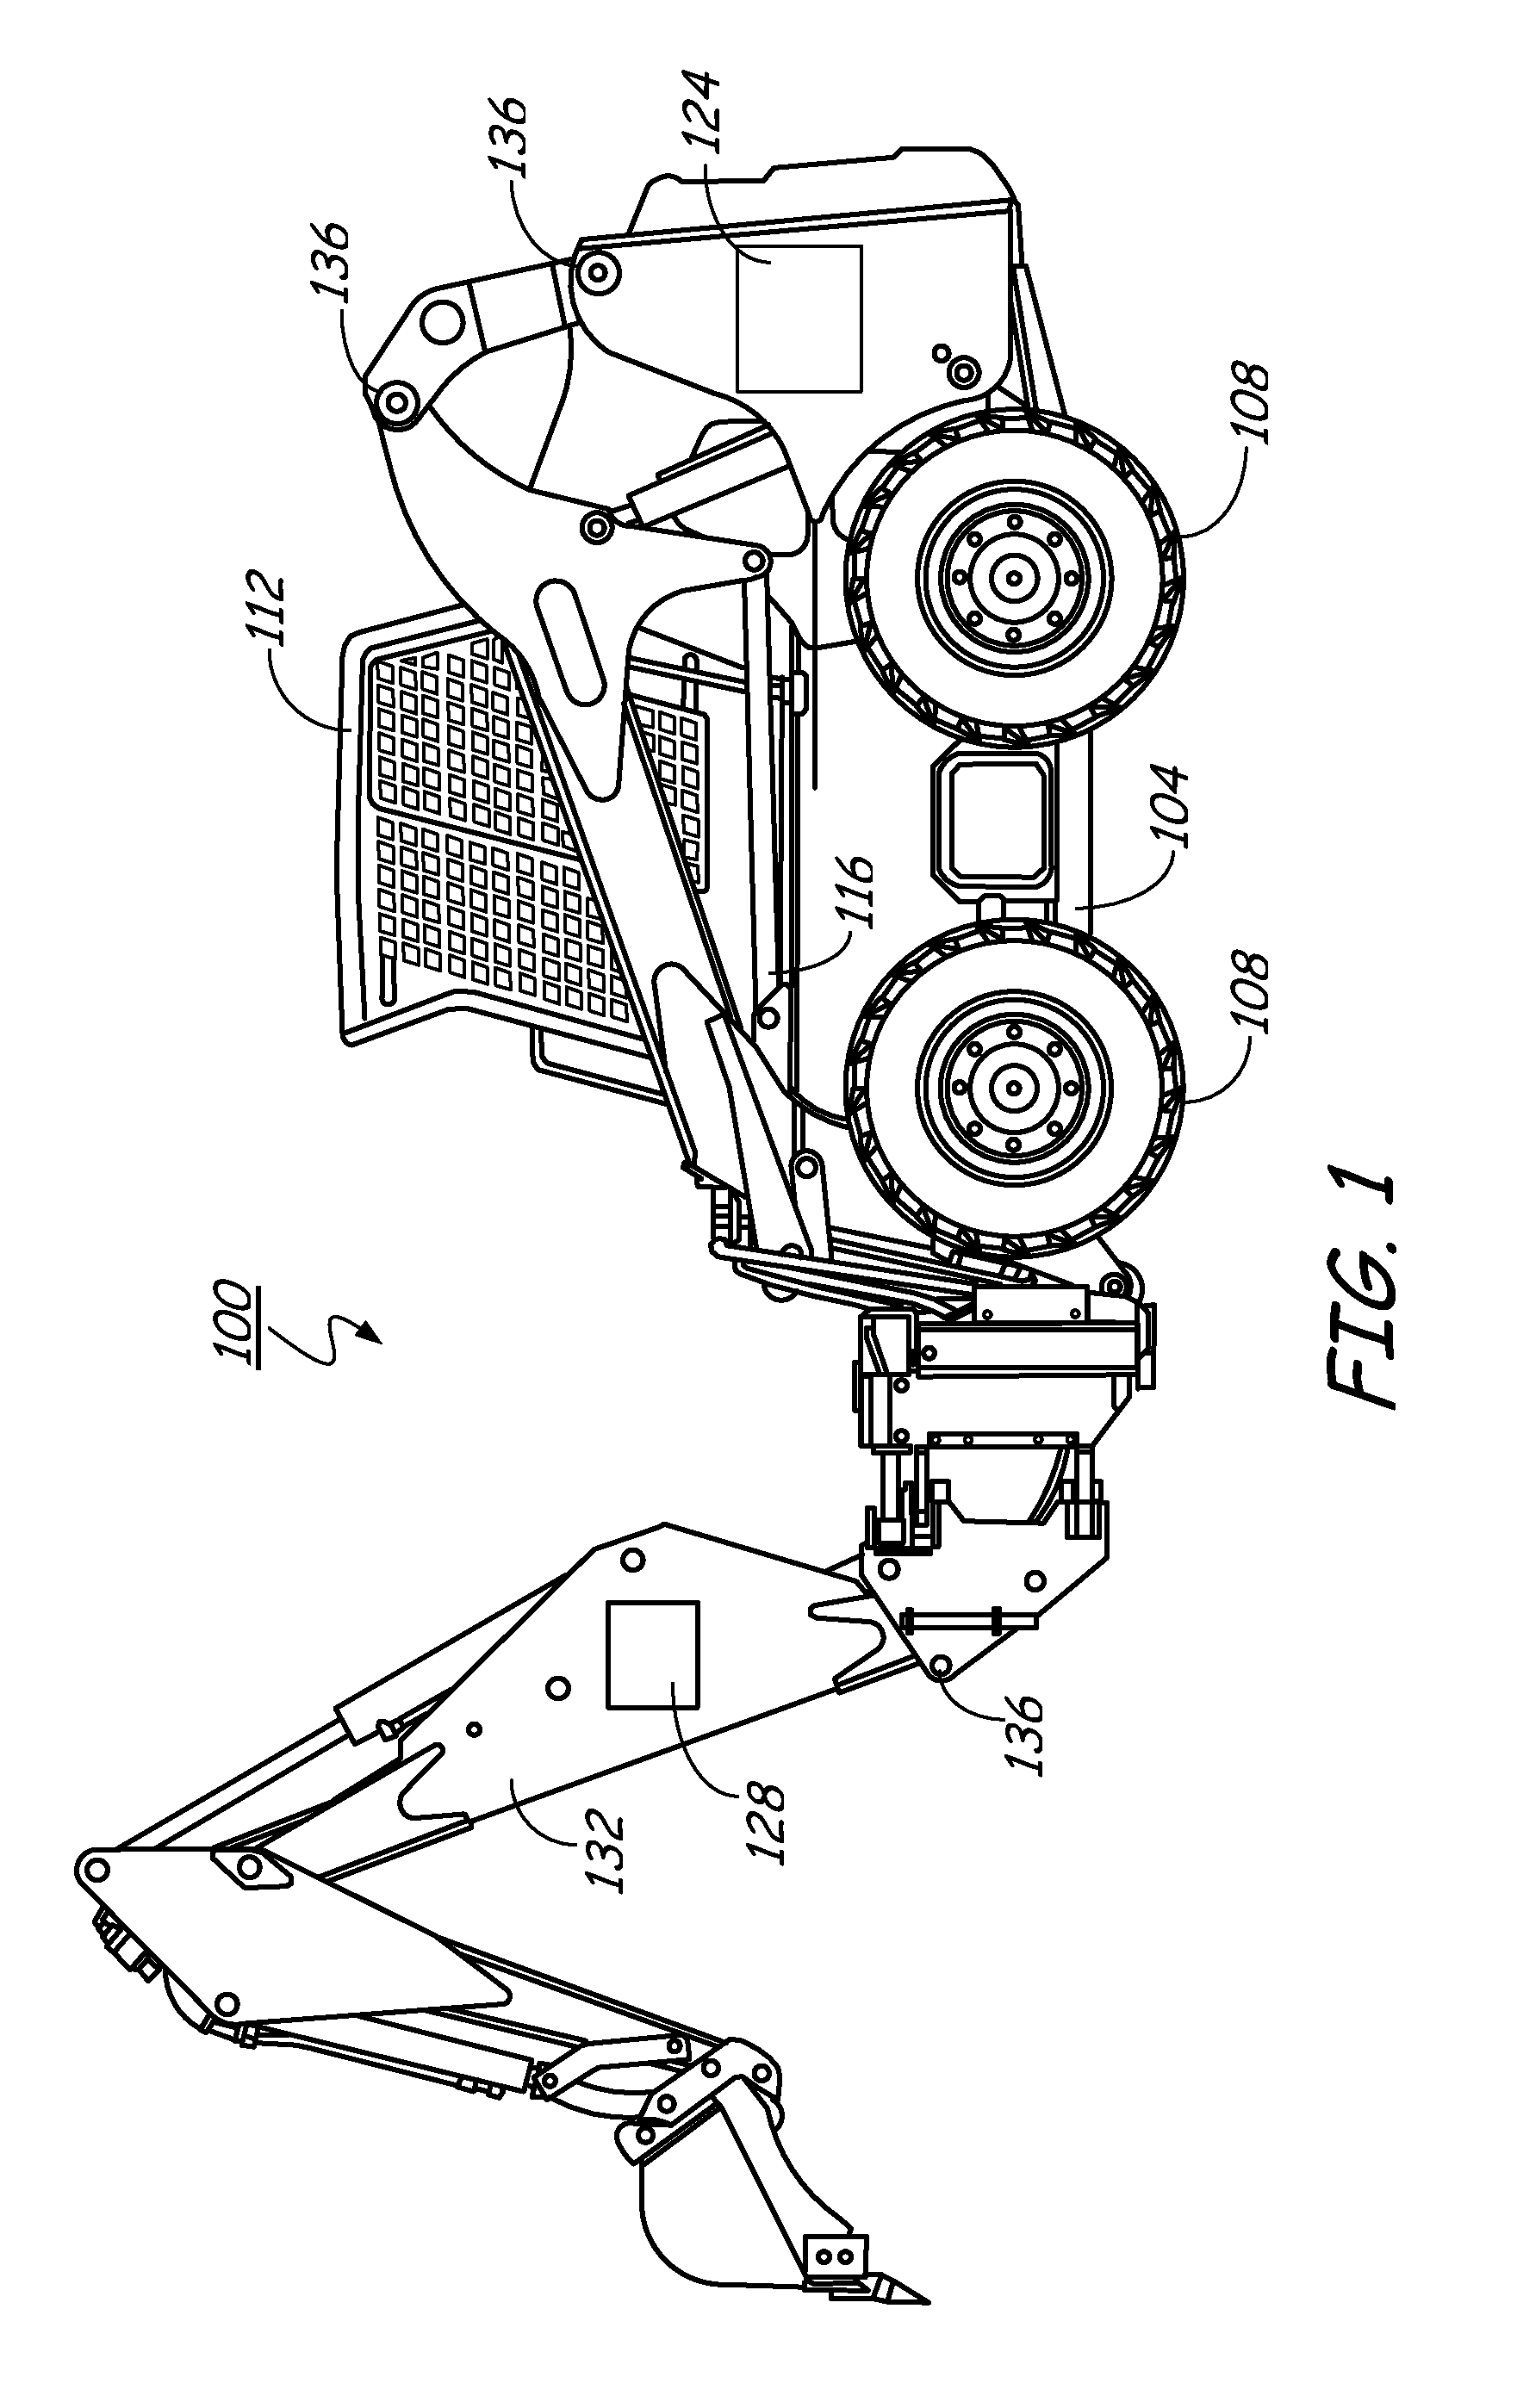 Carrier and Backhoe Control System and Method